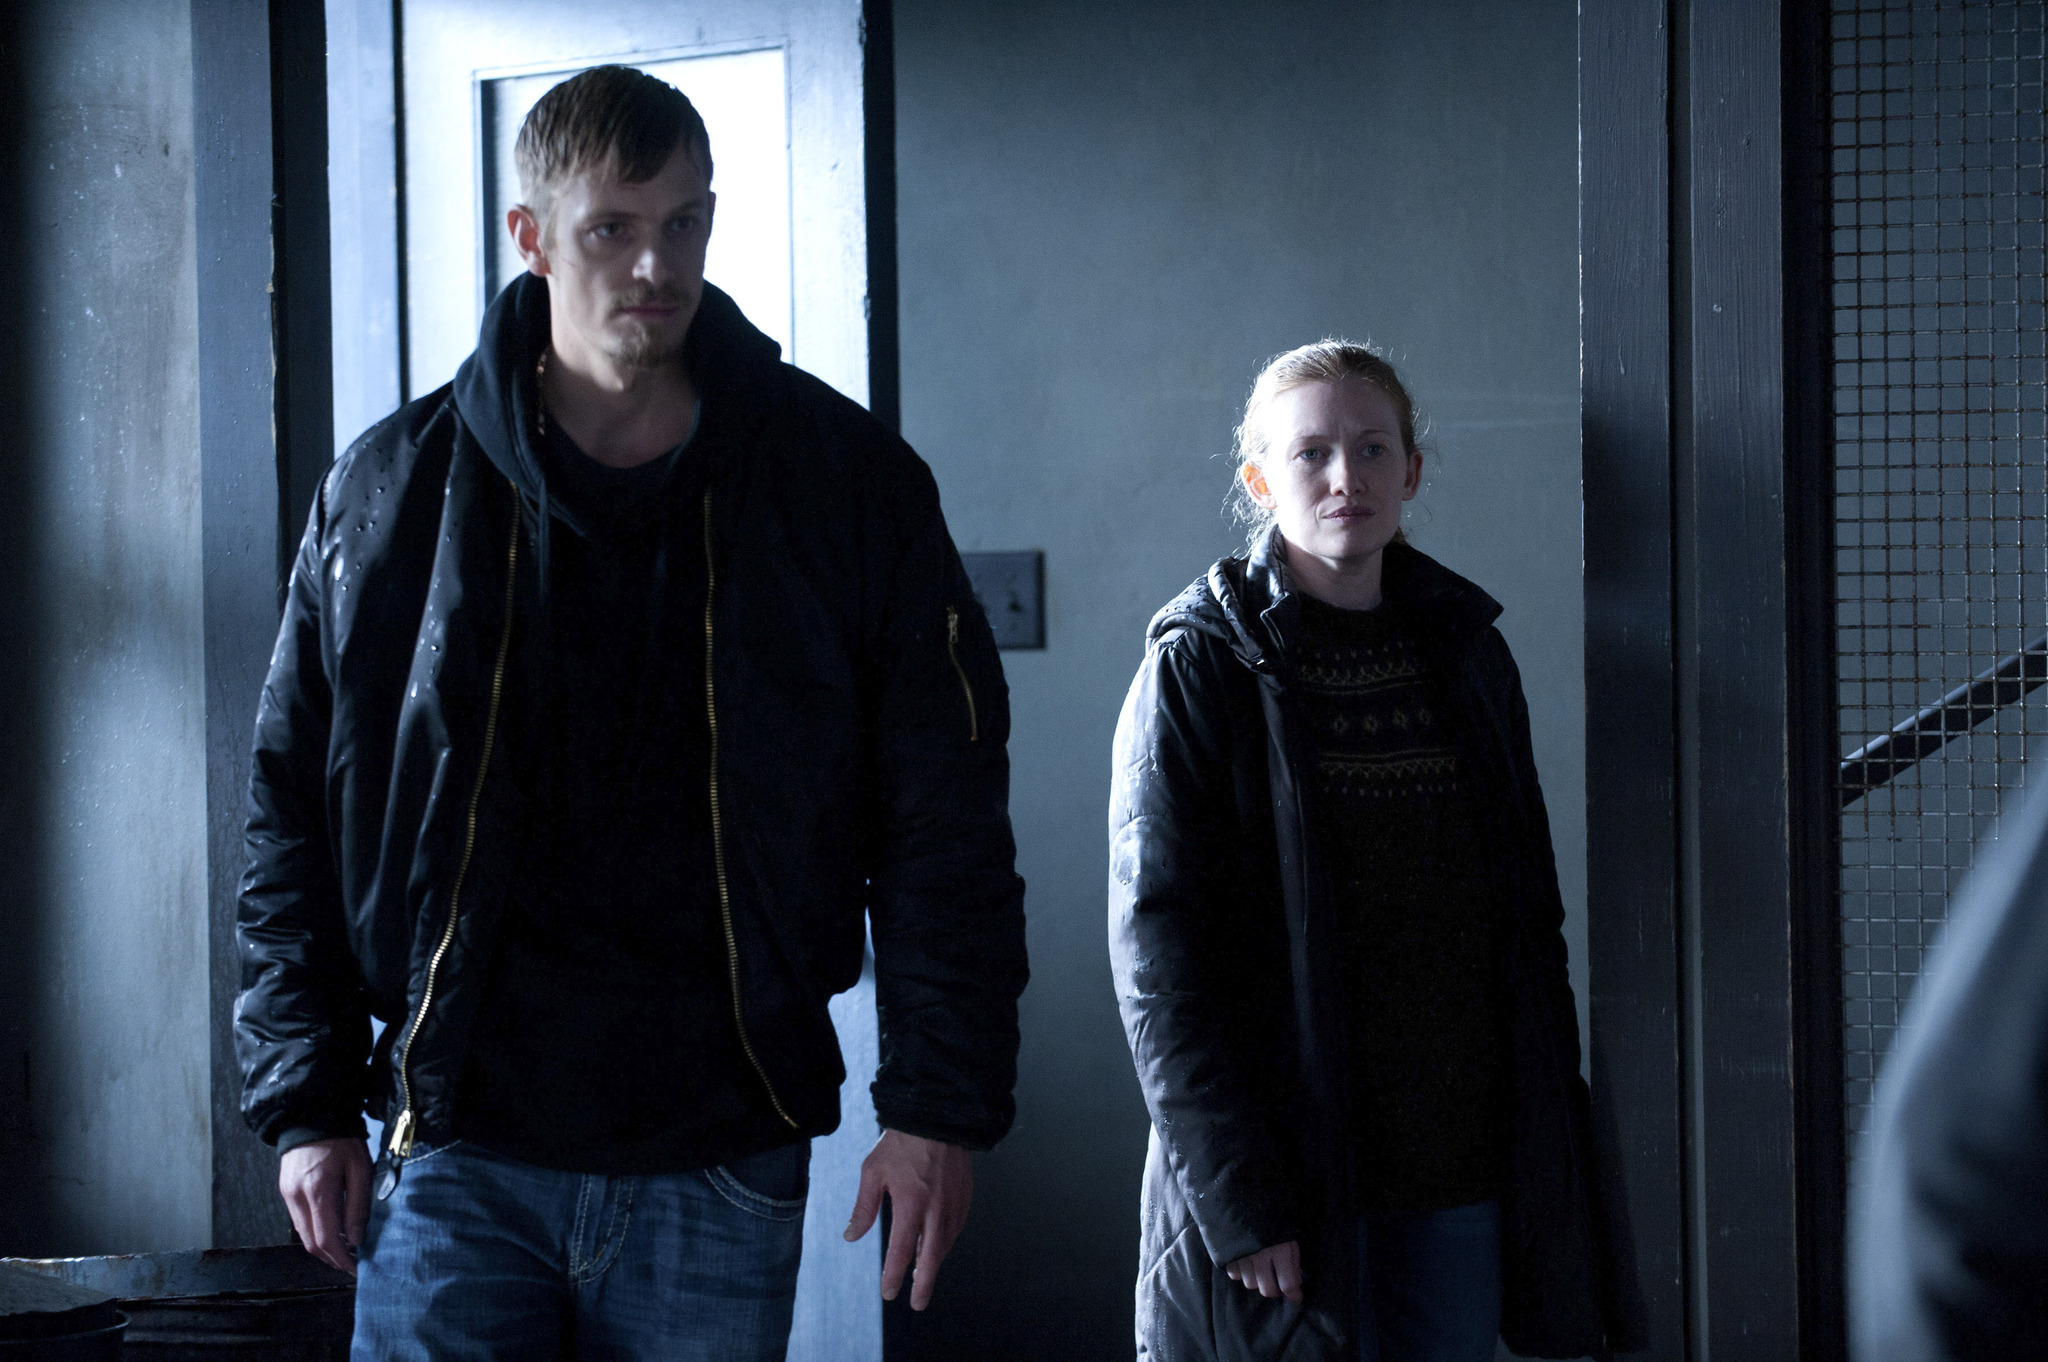 Mireille Enos, Joel Kinnaman and Stephen Holder in Zmogzudyste: What I Know (2012)